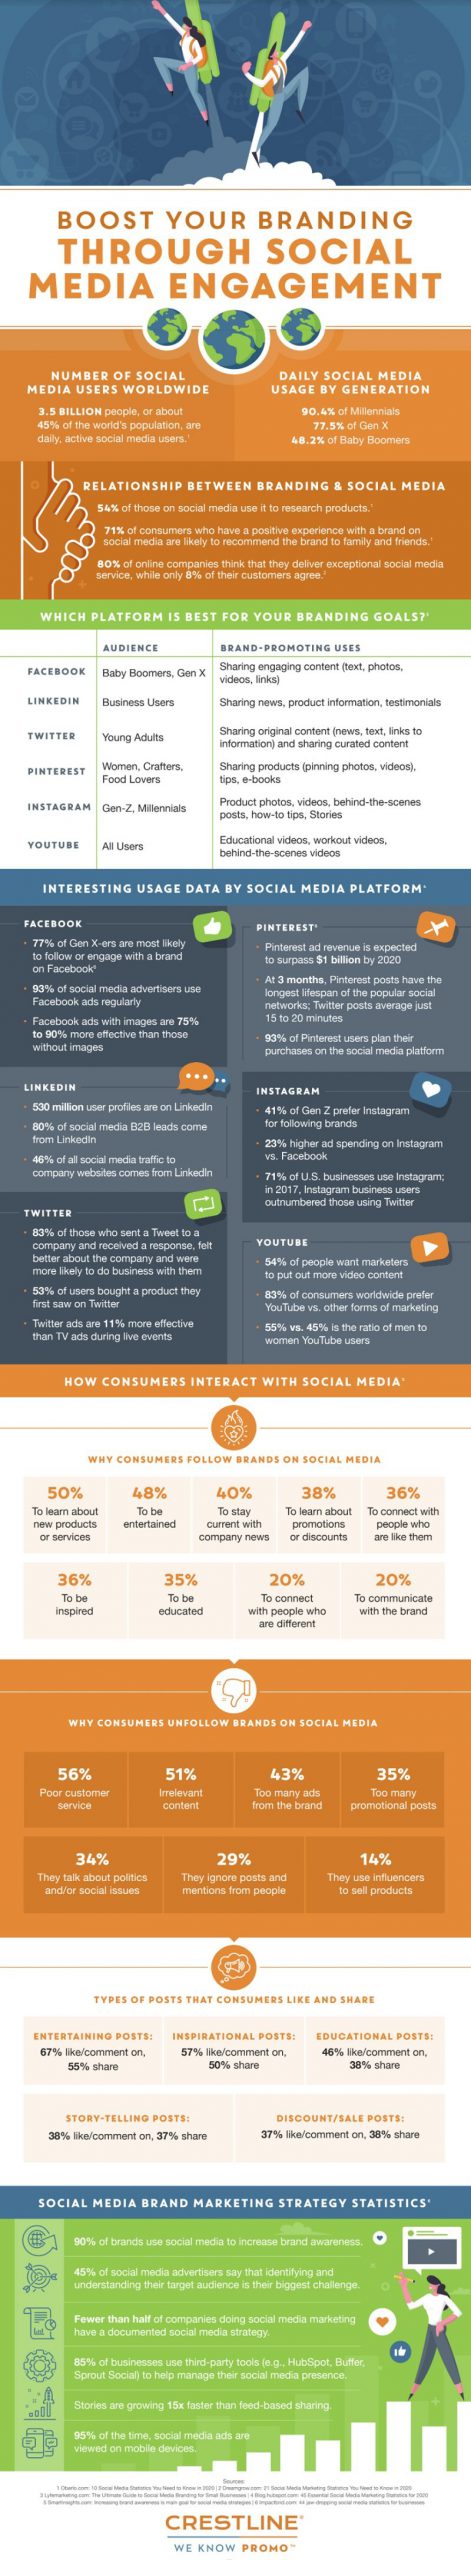 boosting your brand through social media engagement infographic scaled 1